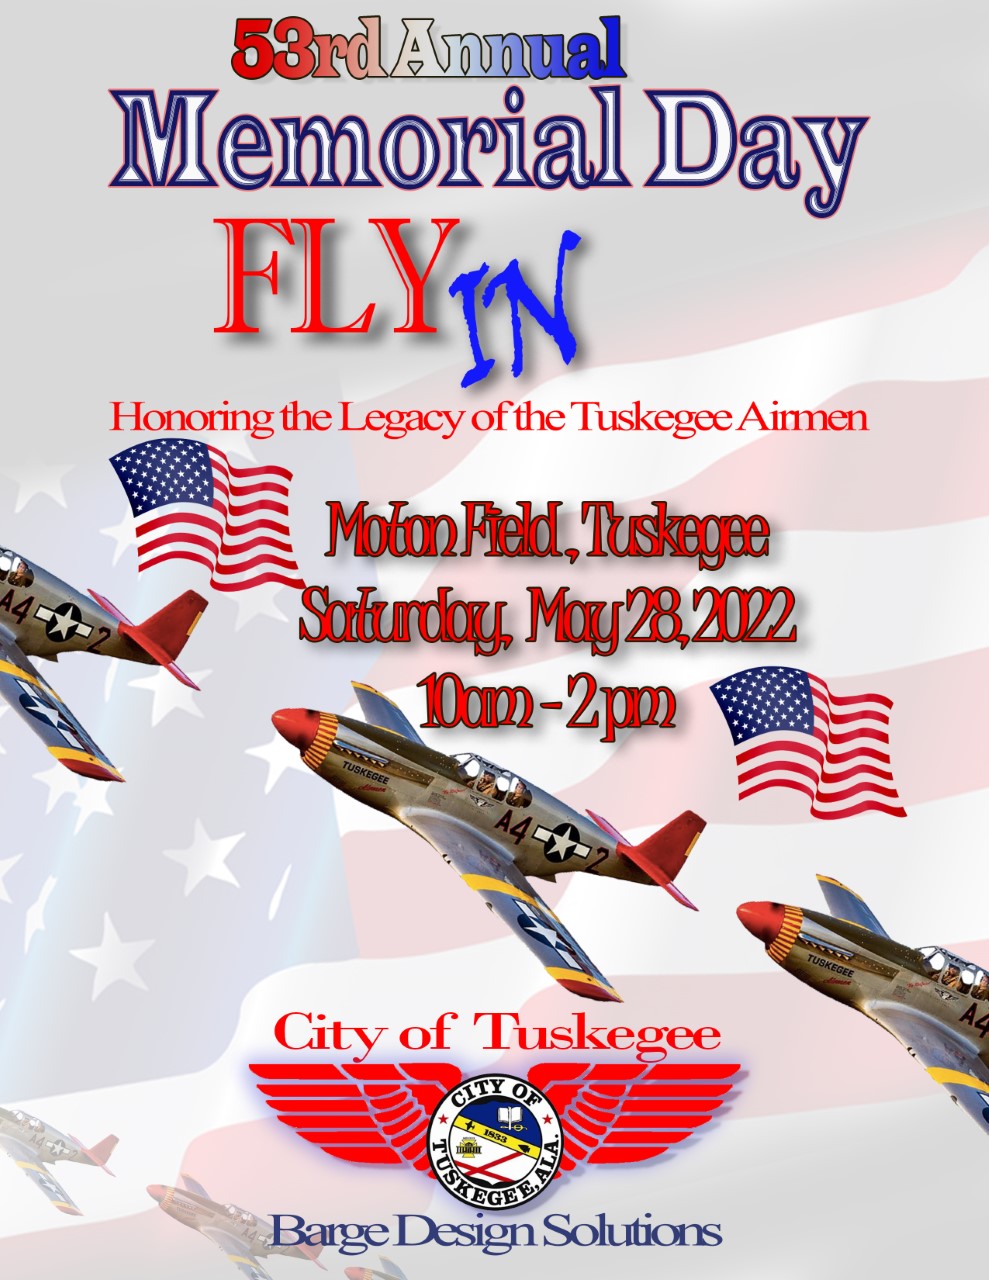 53rd Annual Memorial Day Fly-In Celebration